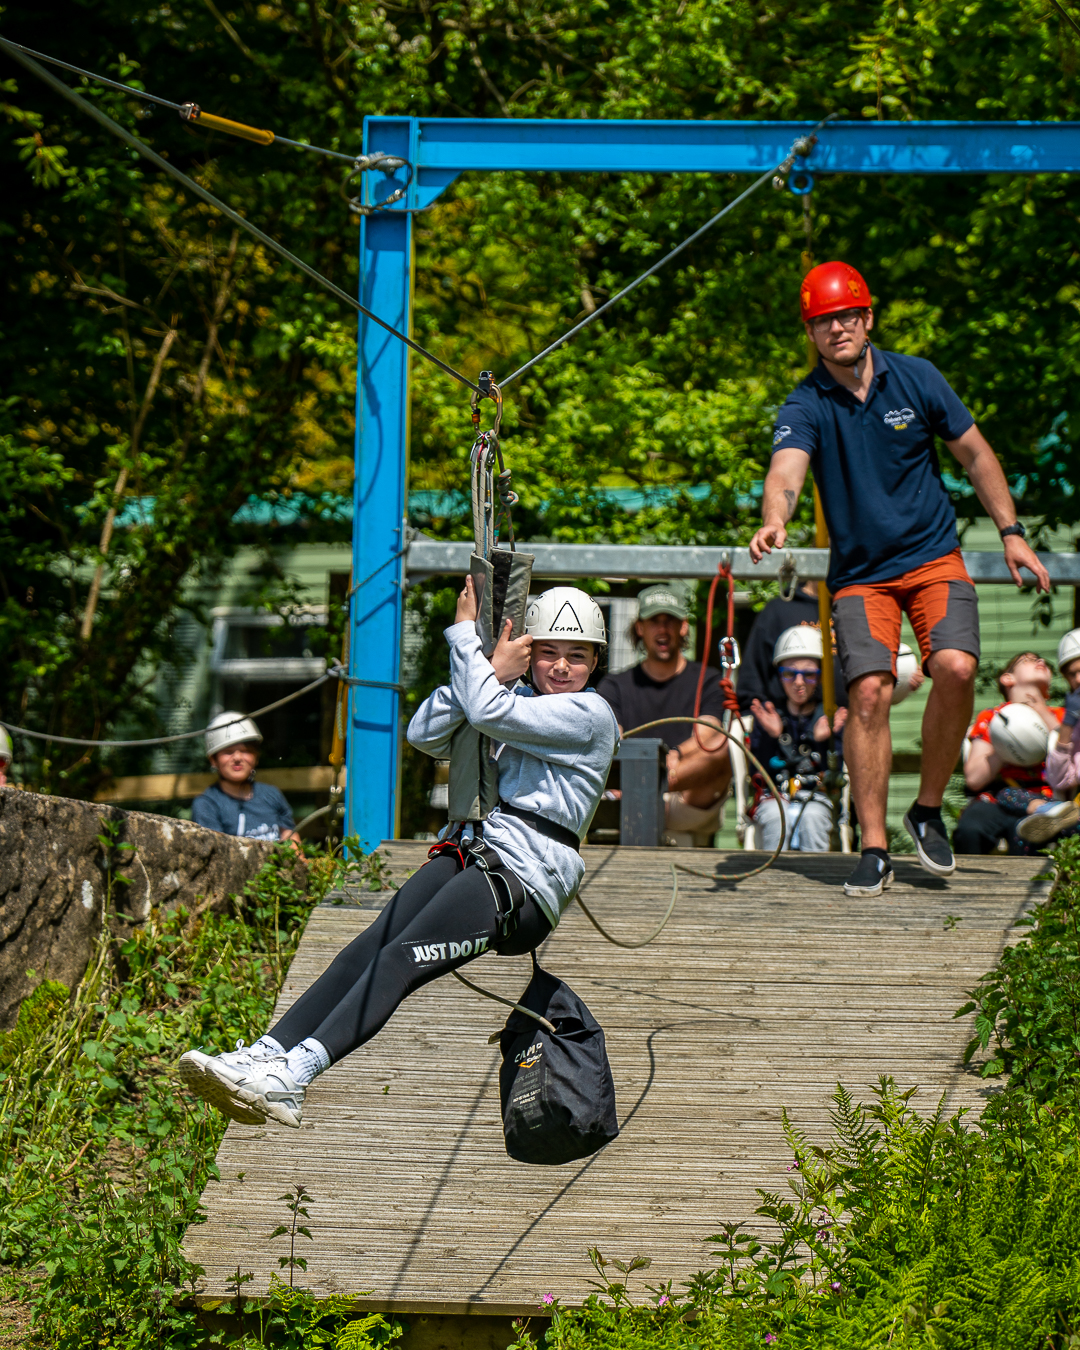 A girl sitting suspended on the Zipwire and moving away from the platform that's behind her, where a member of staff has just released her from the red rope that lets her zoom down the wire. There are other group members in the background watching and clapping.